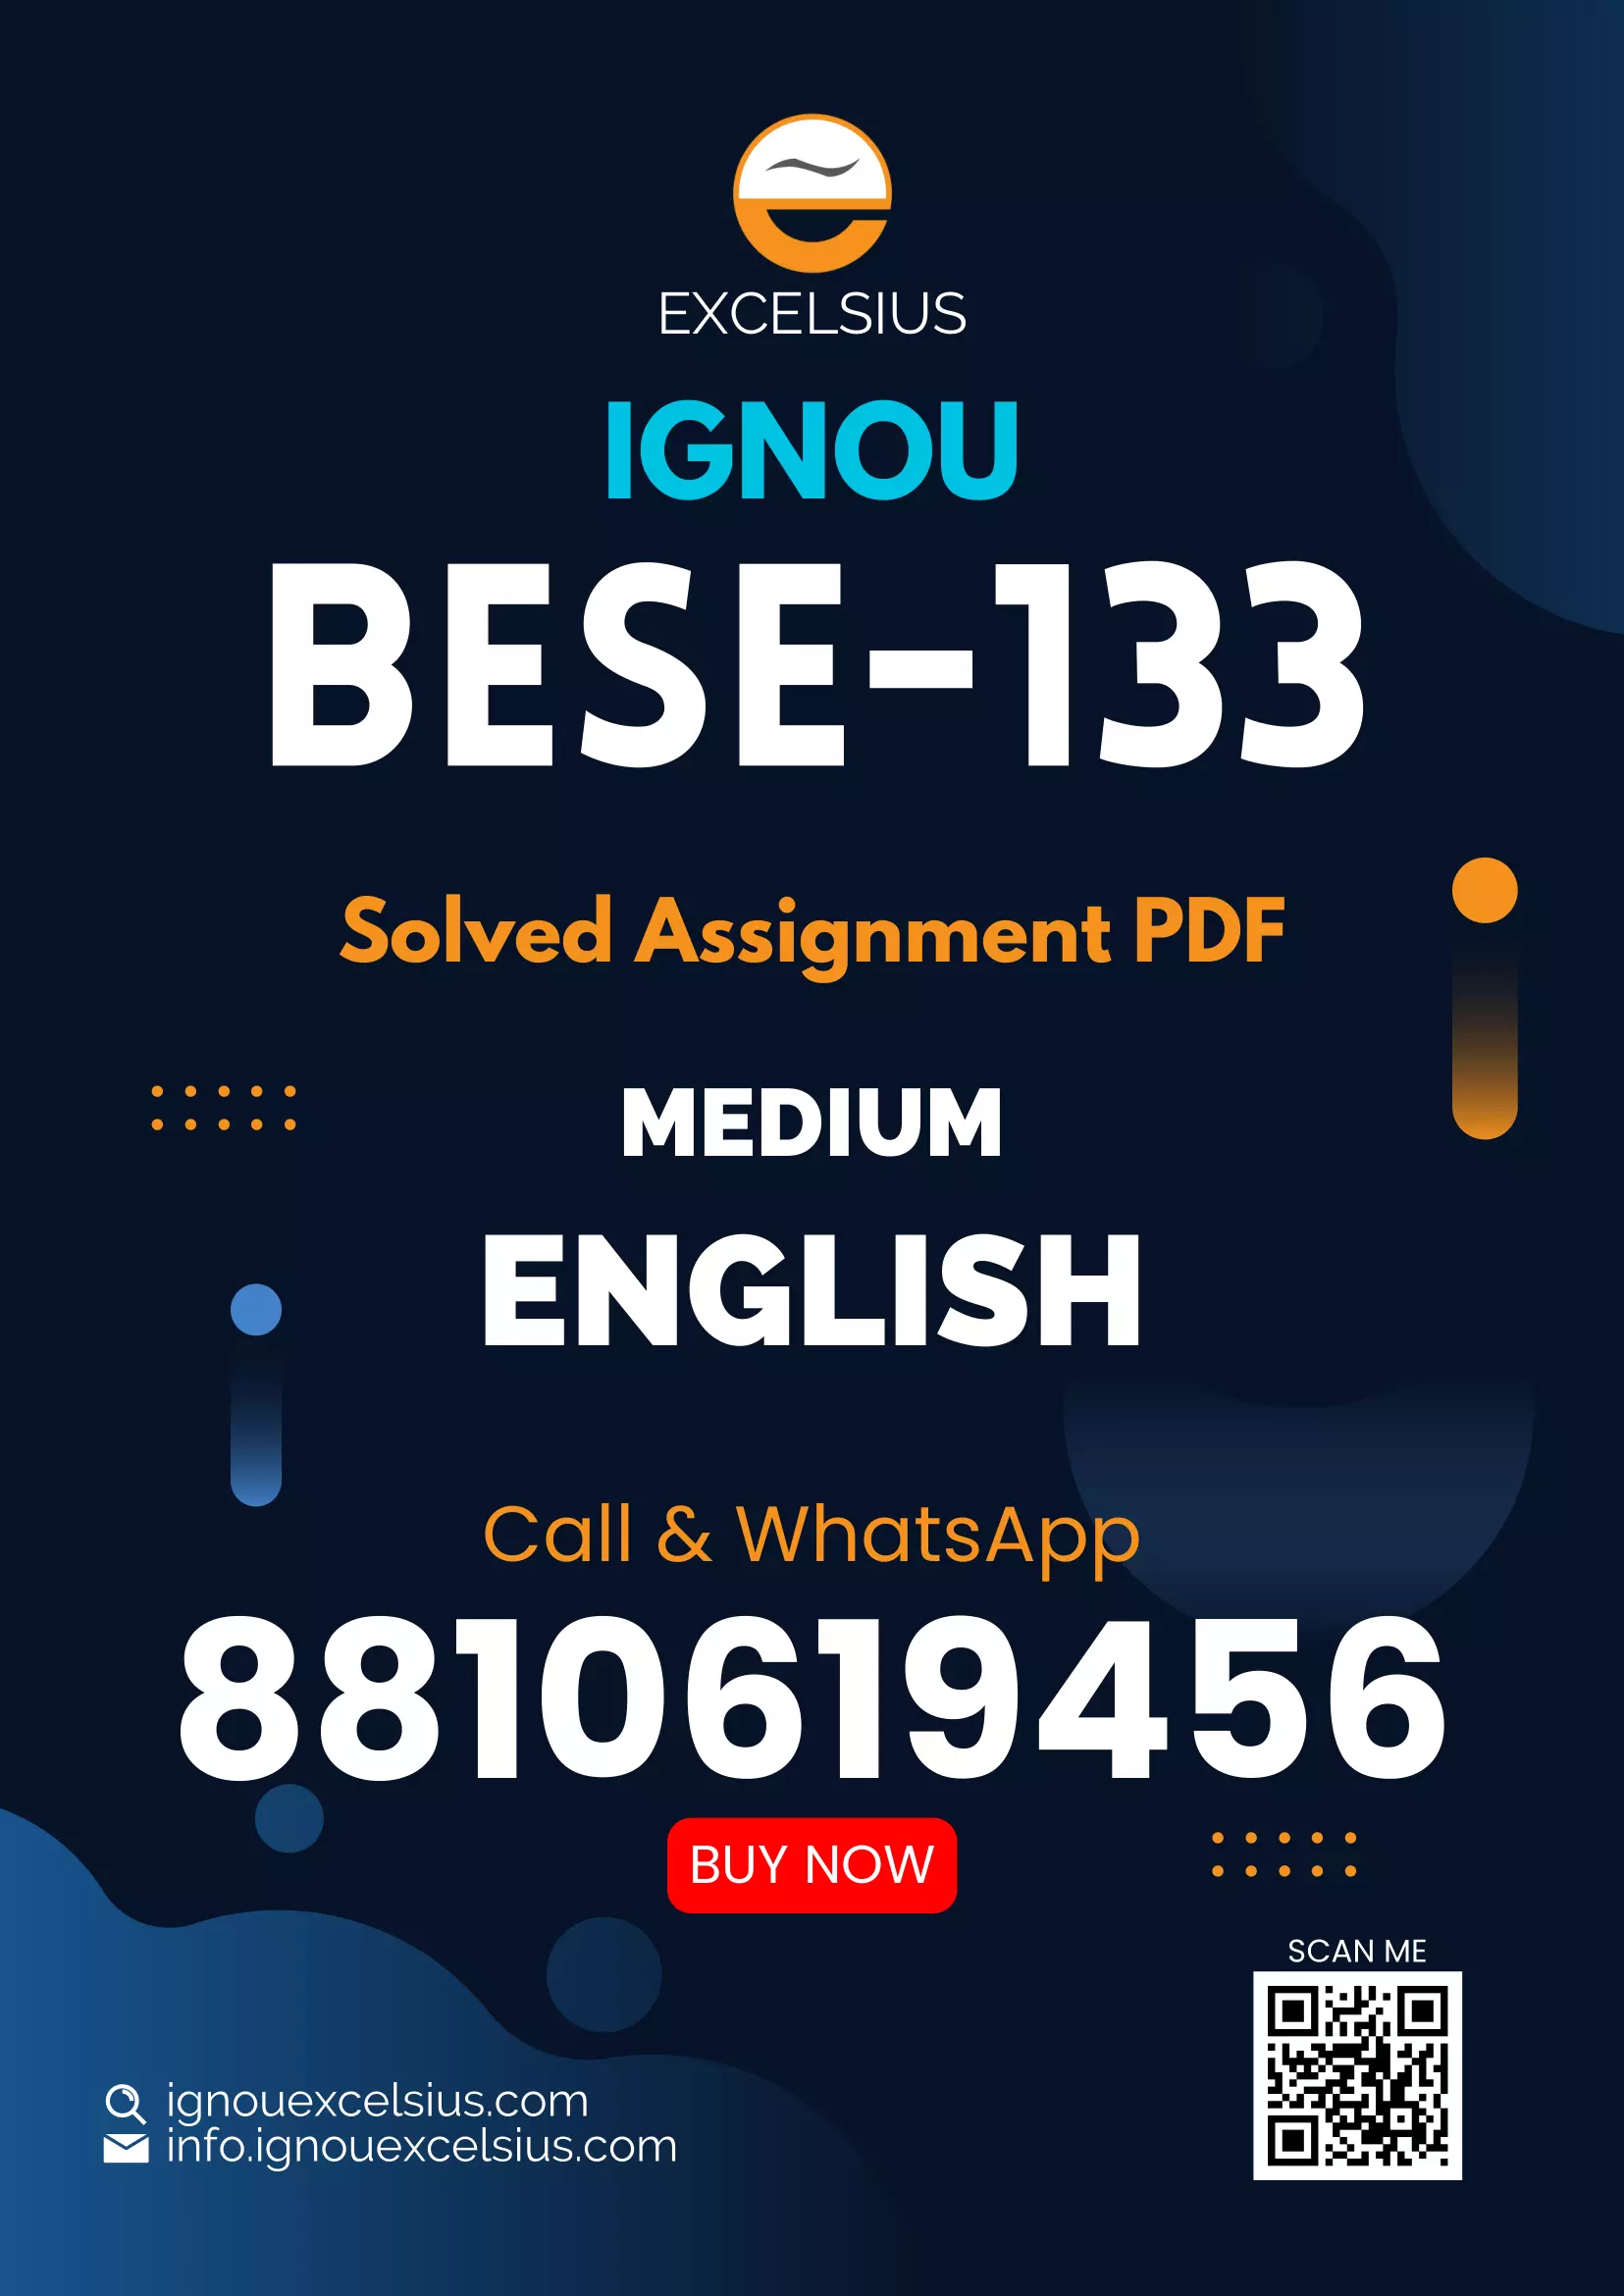 IGNOU BESE-133 - Adolescence and Family Education Latest Solved Assignment-January 2021 - July 2021